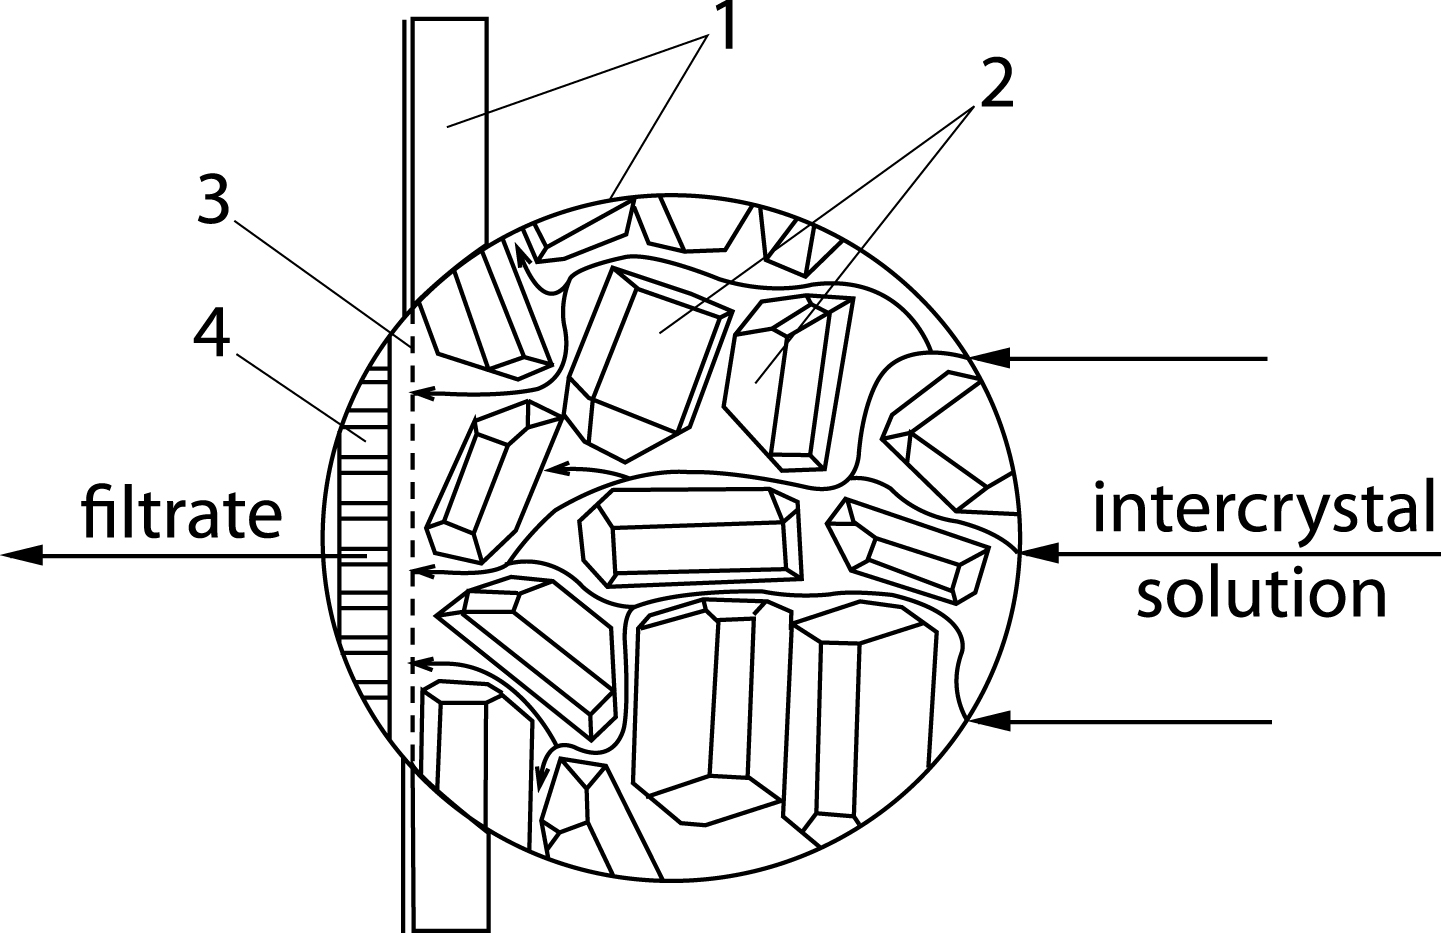 Flow diagram of the intercrystal solution in the centrifuge rotor: 1-a layer of sugar crystals, 2-sugar crystals, 3-a sieve, 4-a perforated surface